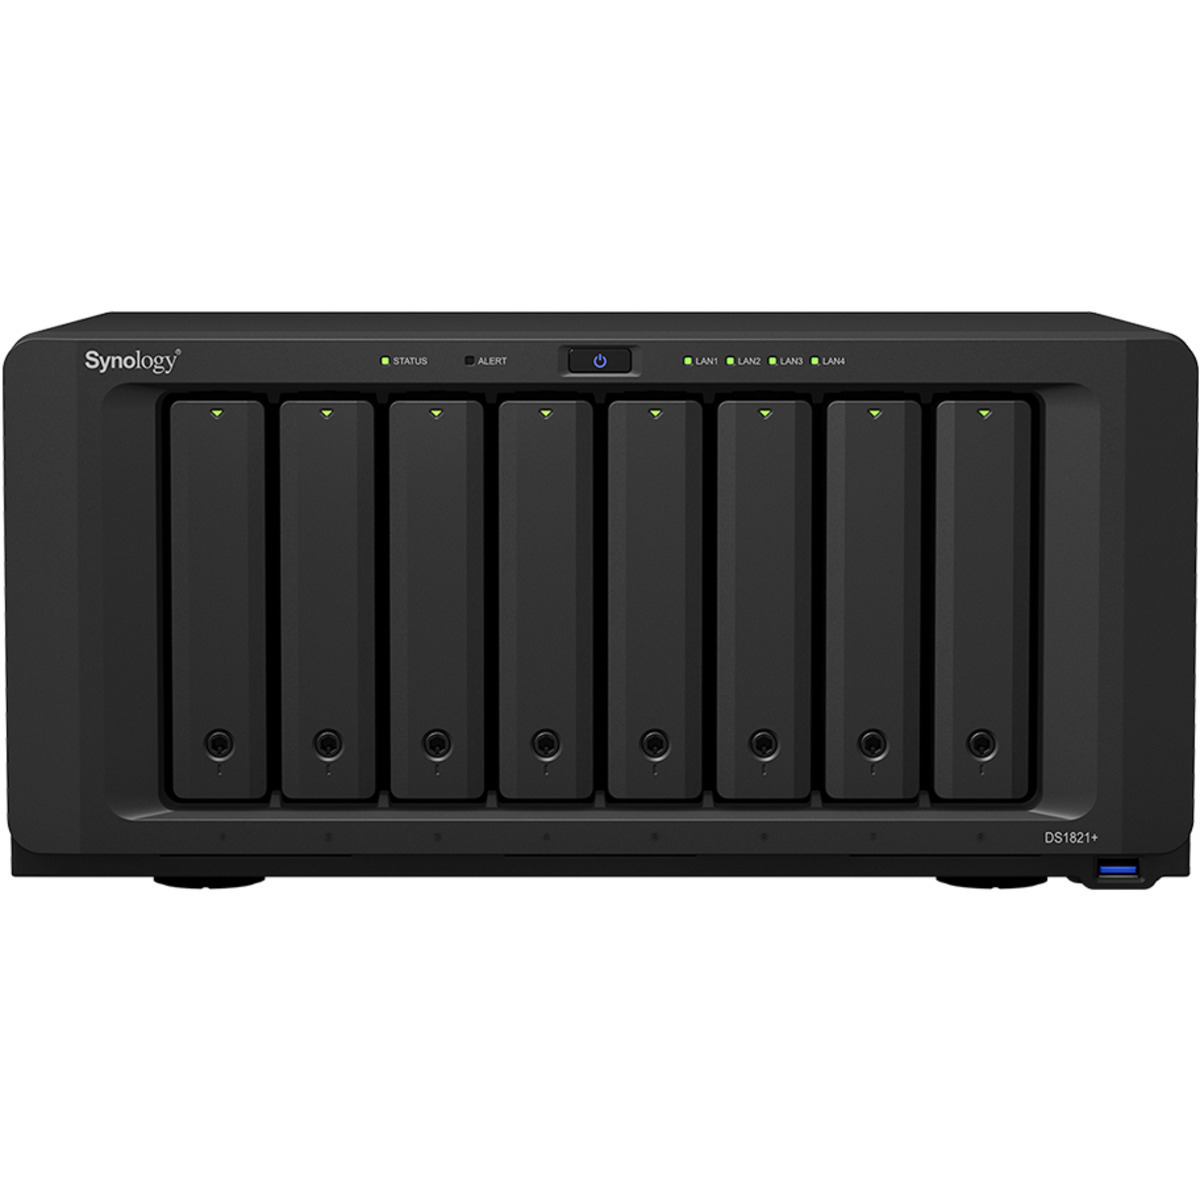 buy Synology DiskStation DS1821+ 144tb Desktop NAS - Network Attached Storage Device 8x18000gb Seagate IronWolf Pro ST18000NT001 3.5 7200rpm SATA 6Gb/s HDD NAS Class Drives Installed - Burn-In Tested - FREE RAM UPGRADE - nas headquarters buy network attached storage server device das new raid-5 free shipping simply usa christmas holiday black friday cyber monday week sale happening now! DiskStation DS1821+